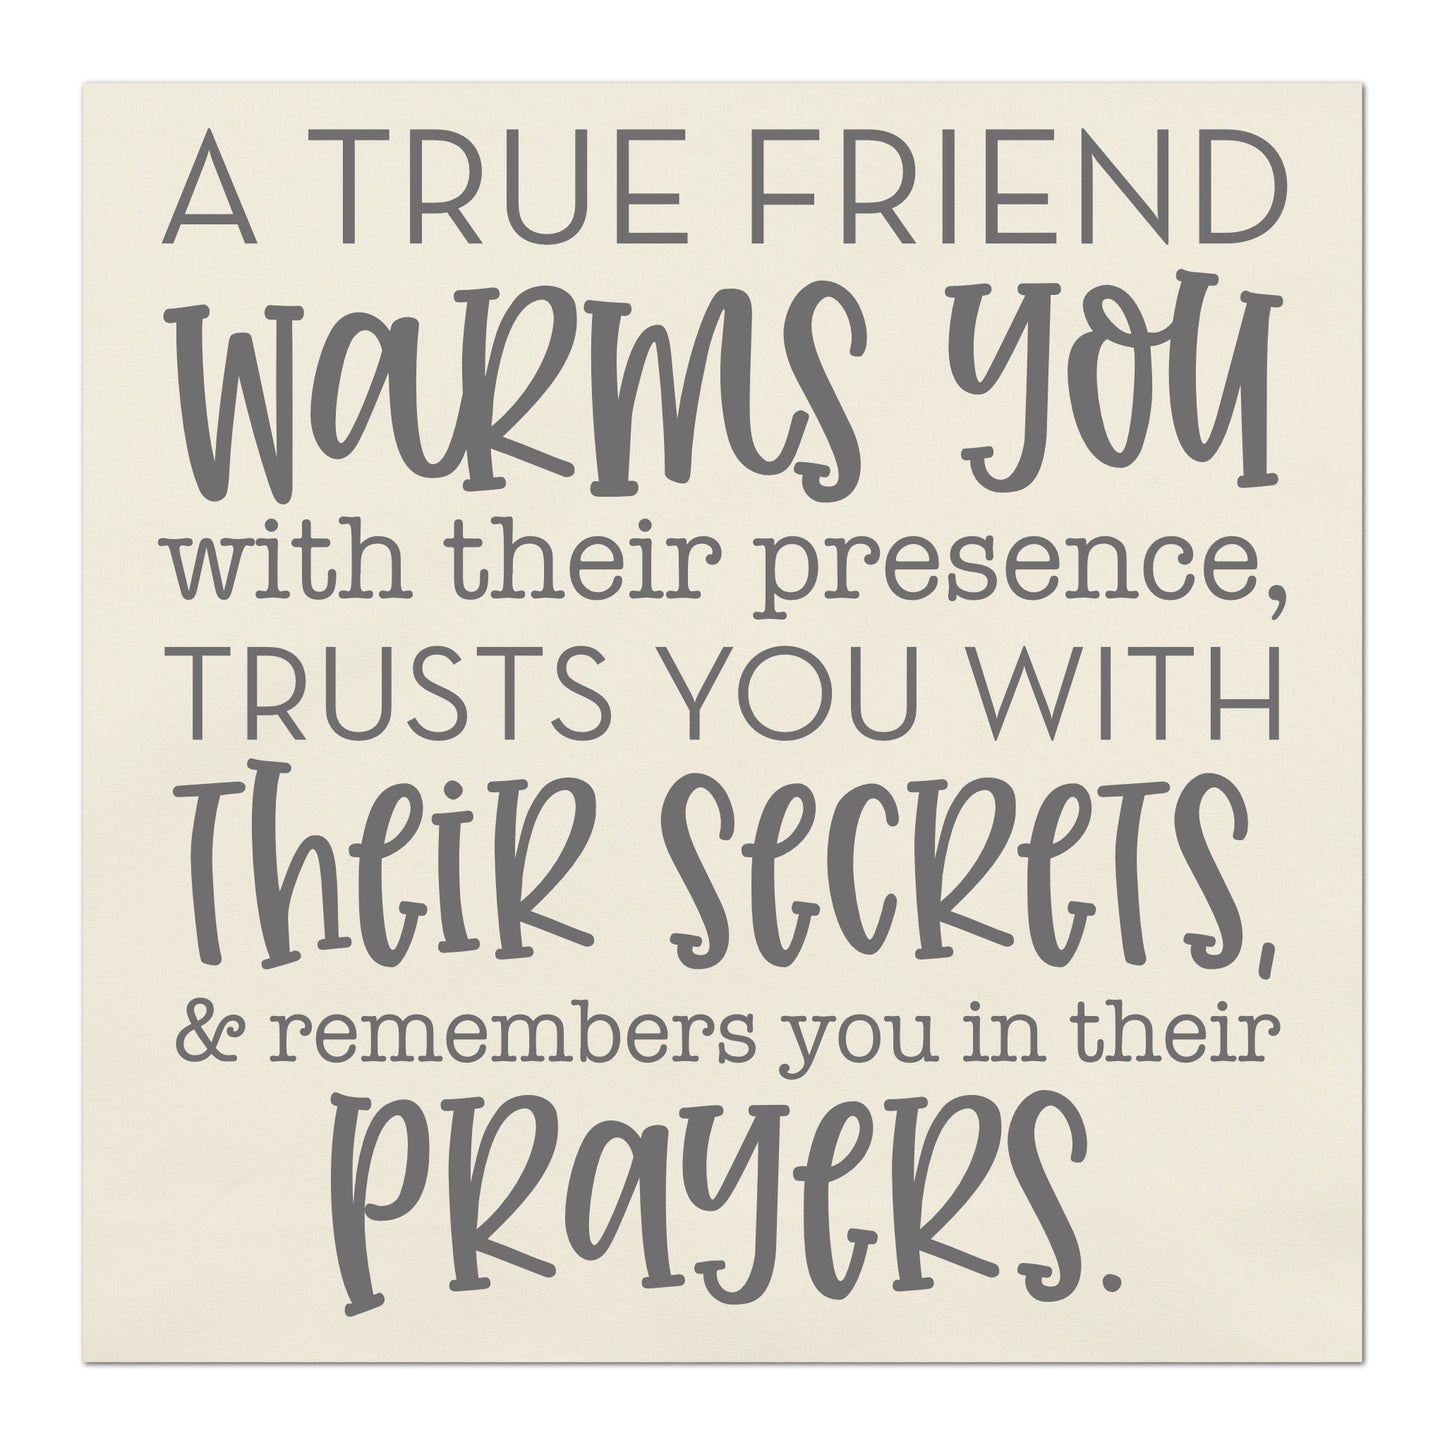 A true friend warms you with their presence, trusts you with their secrets, and remembers you in their prayers - Friendship fabric, Quilt, Craft, Wall Art 